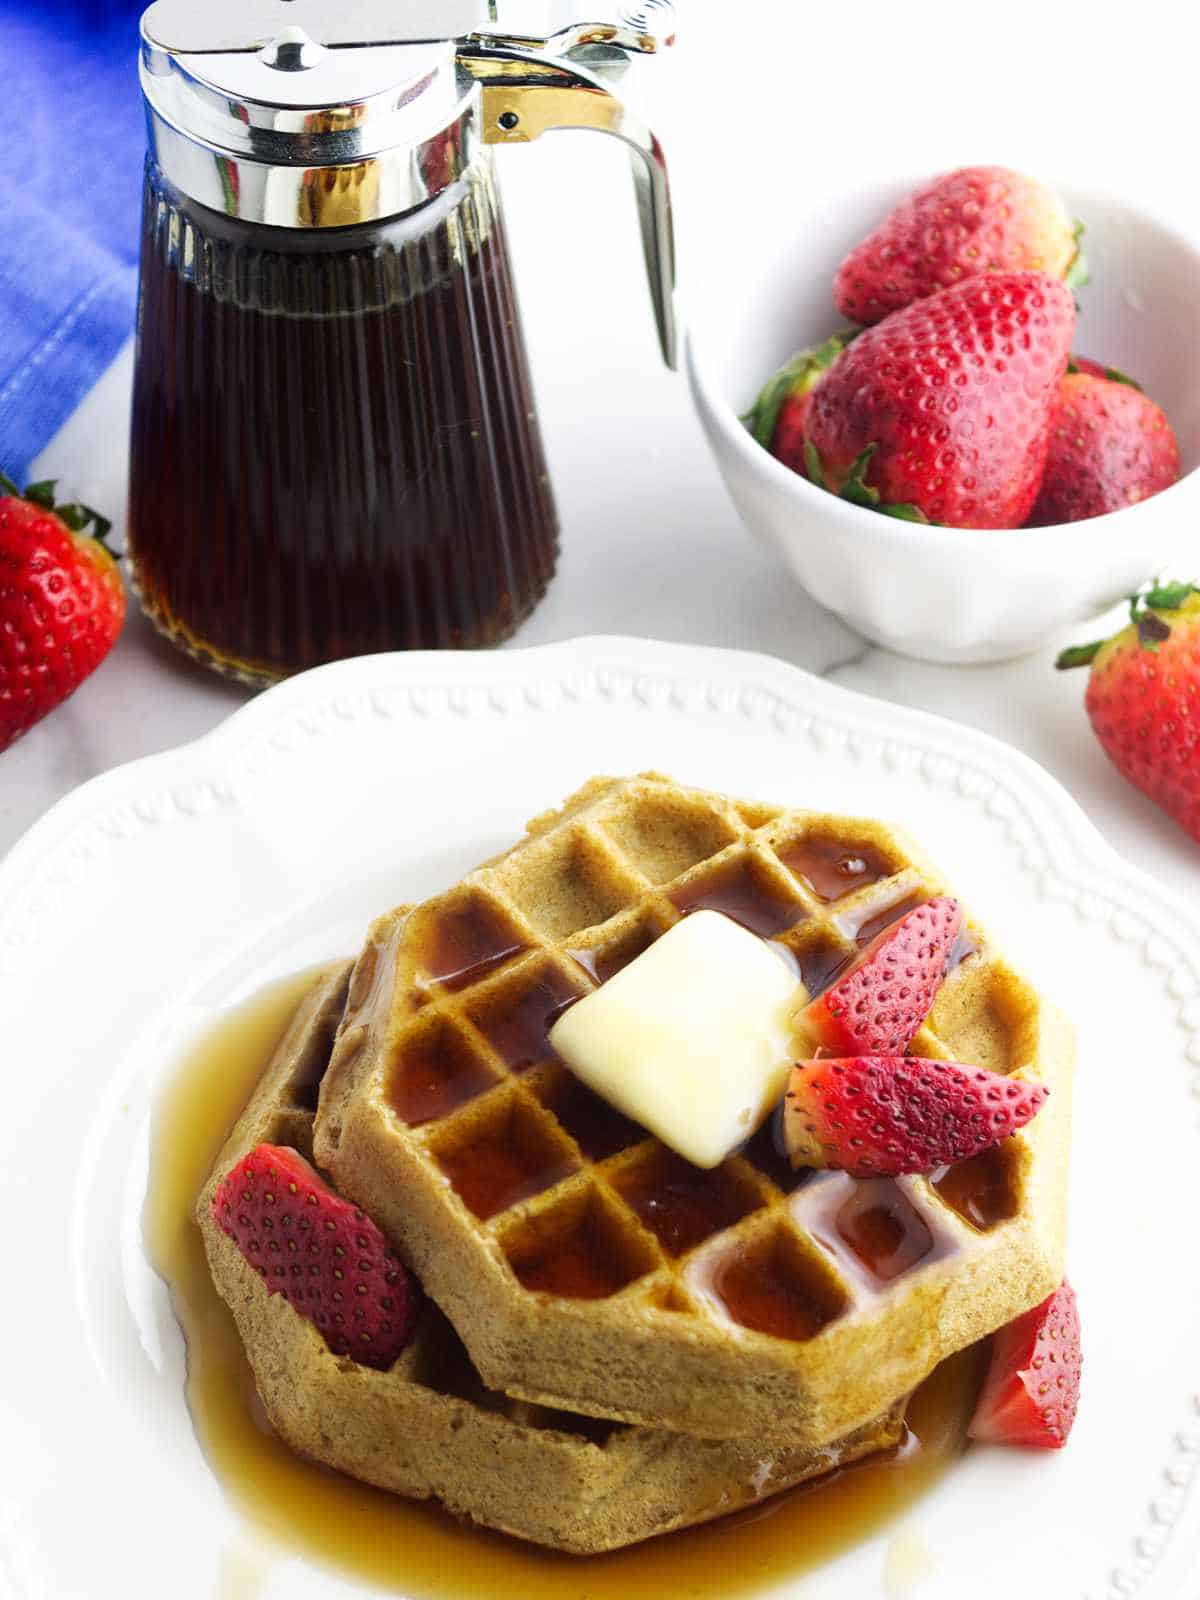 buttered waffles with maple syrup.